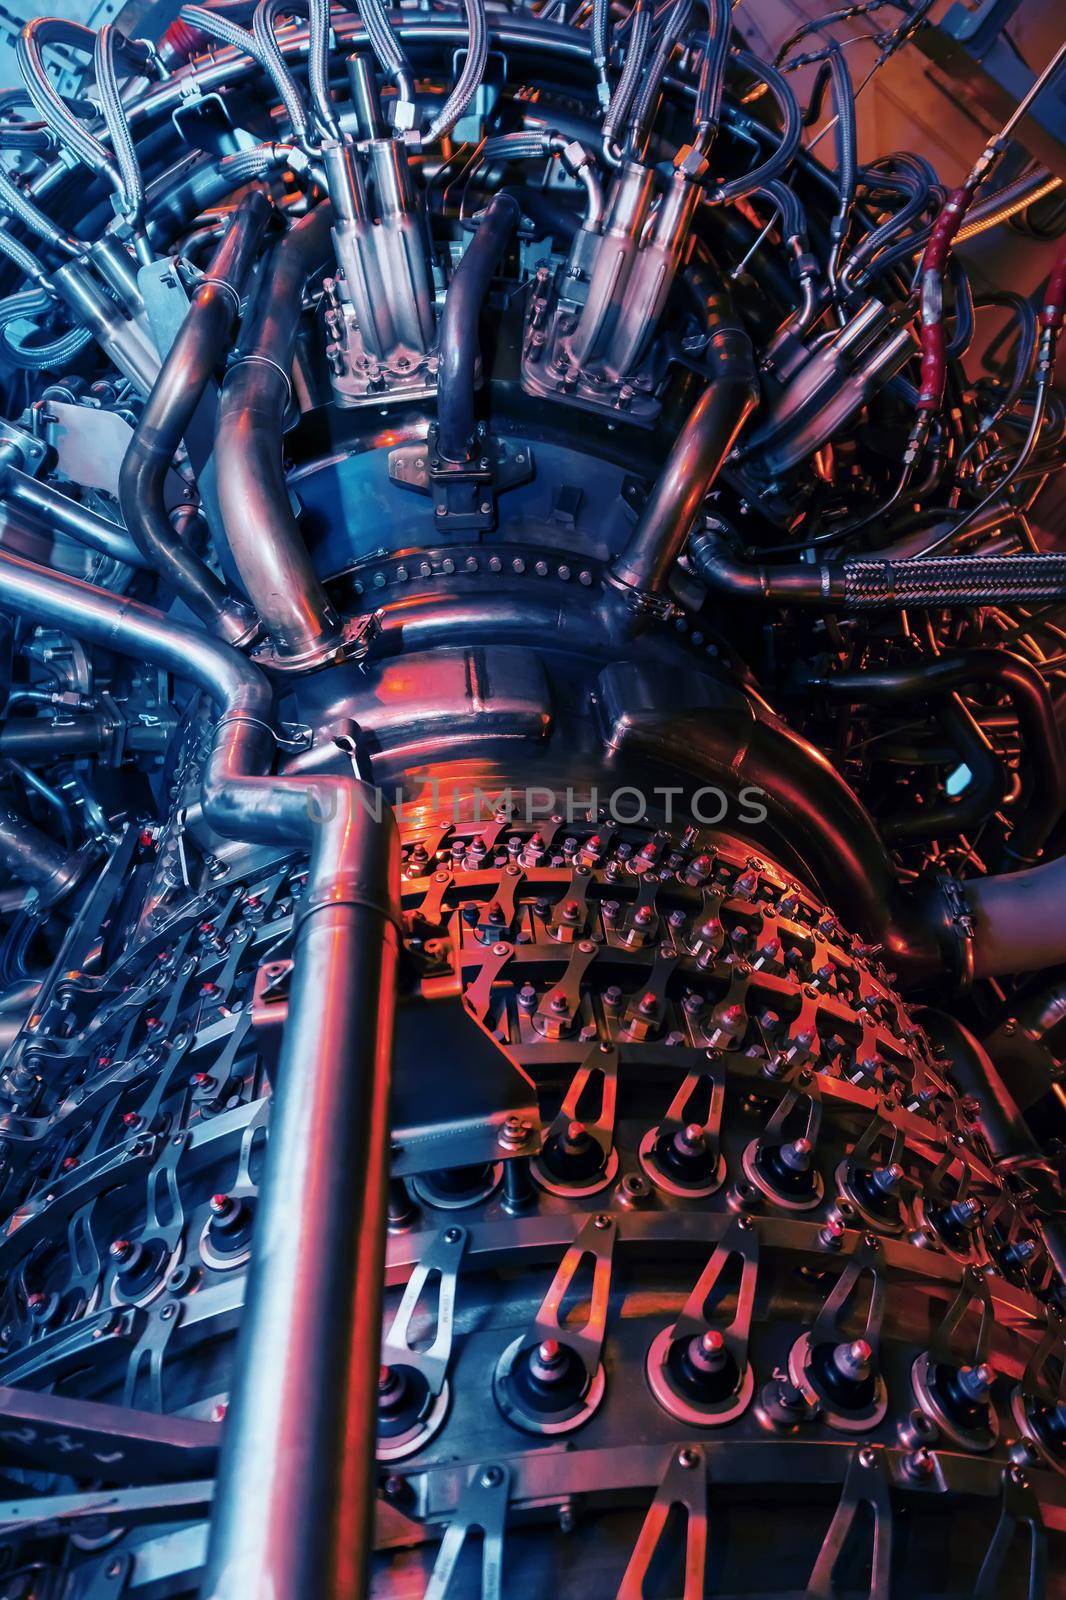 Gas turbine engine, located with internal structural elements, hoses, cylinders and housings by AlexGrec